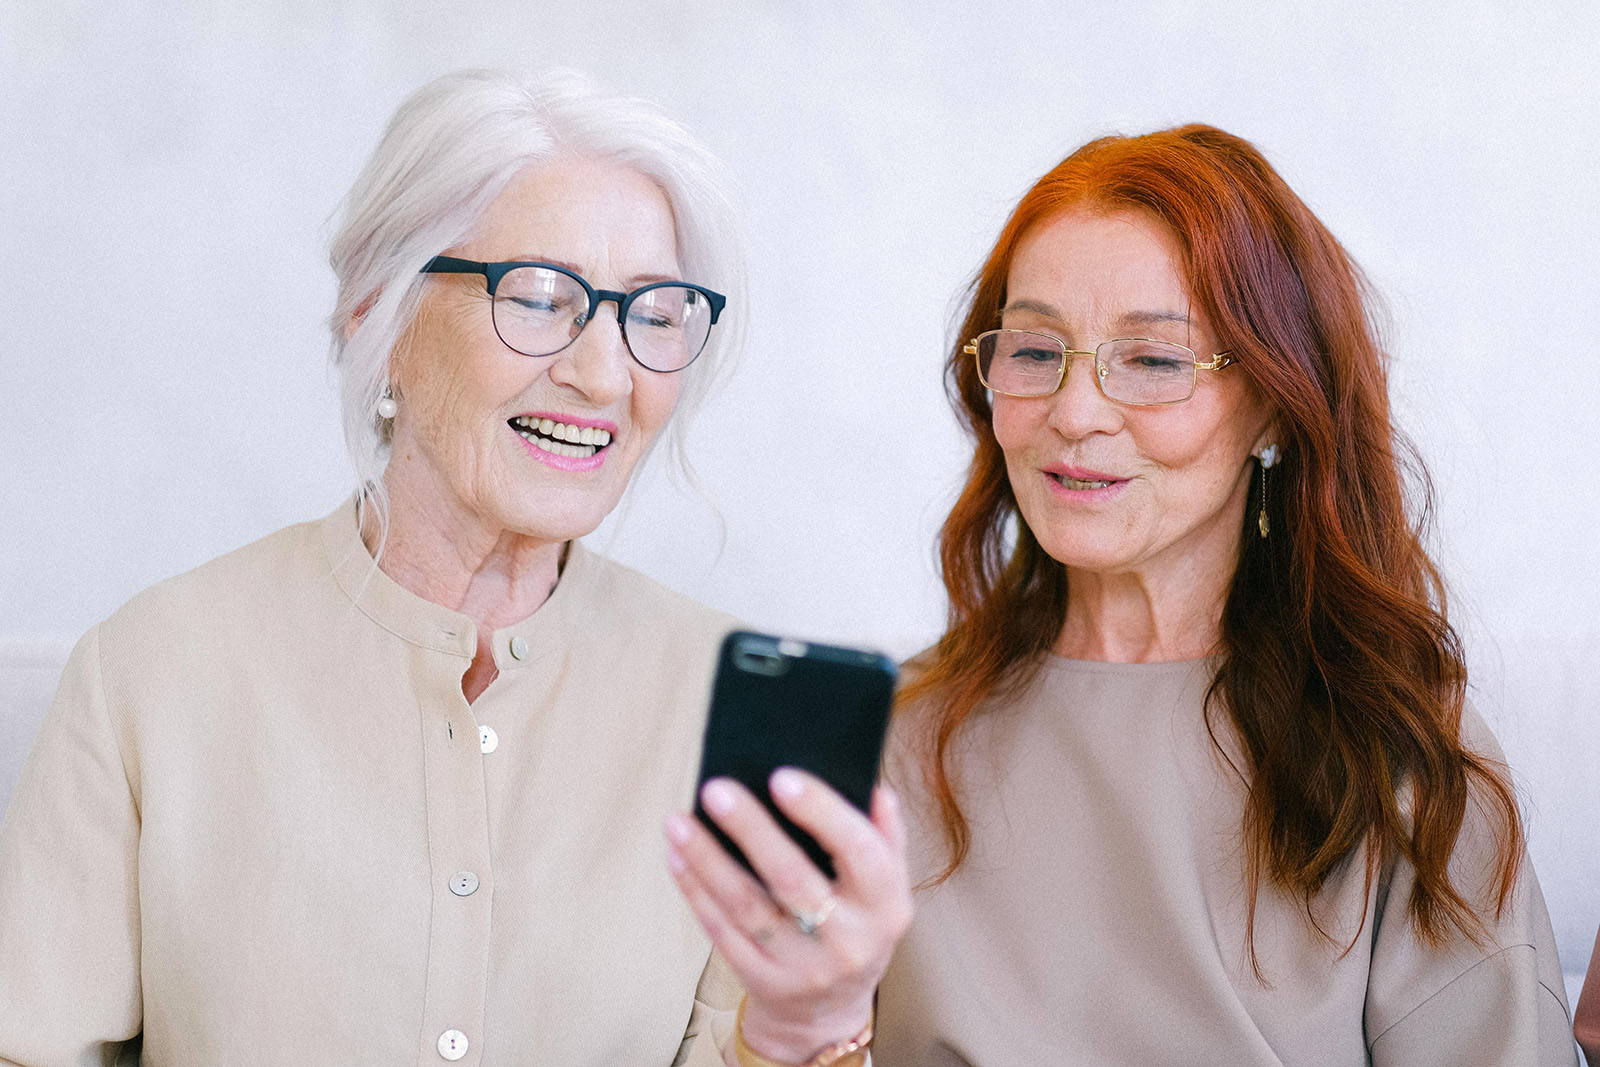 Women smiling while looking at cell phone